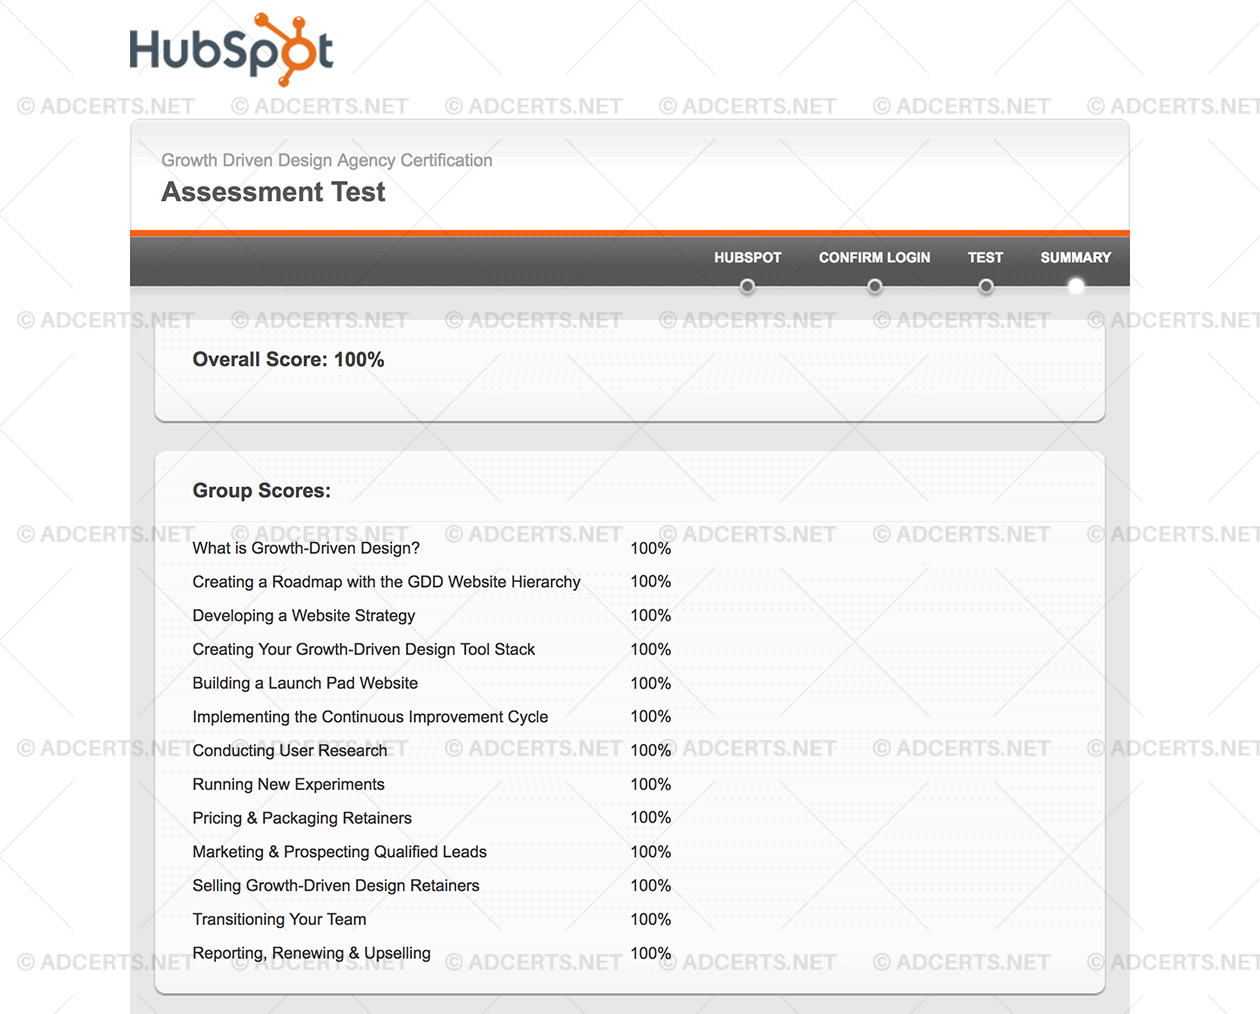 100% CORRECT ANSWERS HubSpot Growth-Driven Design Agency Certification Exam Answers